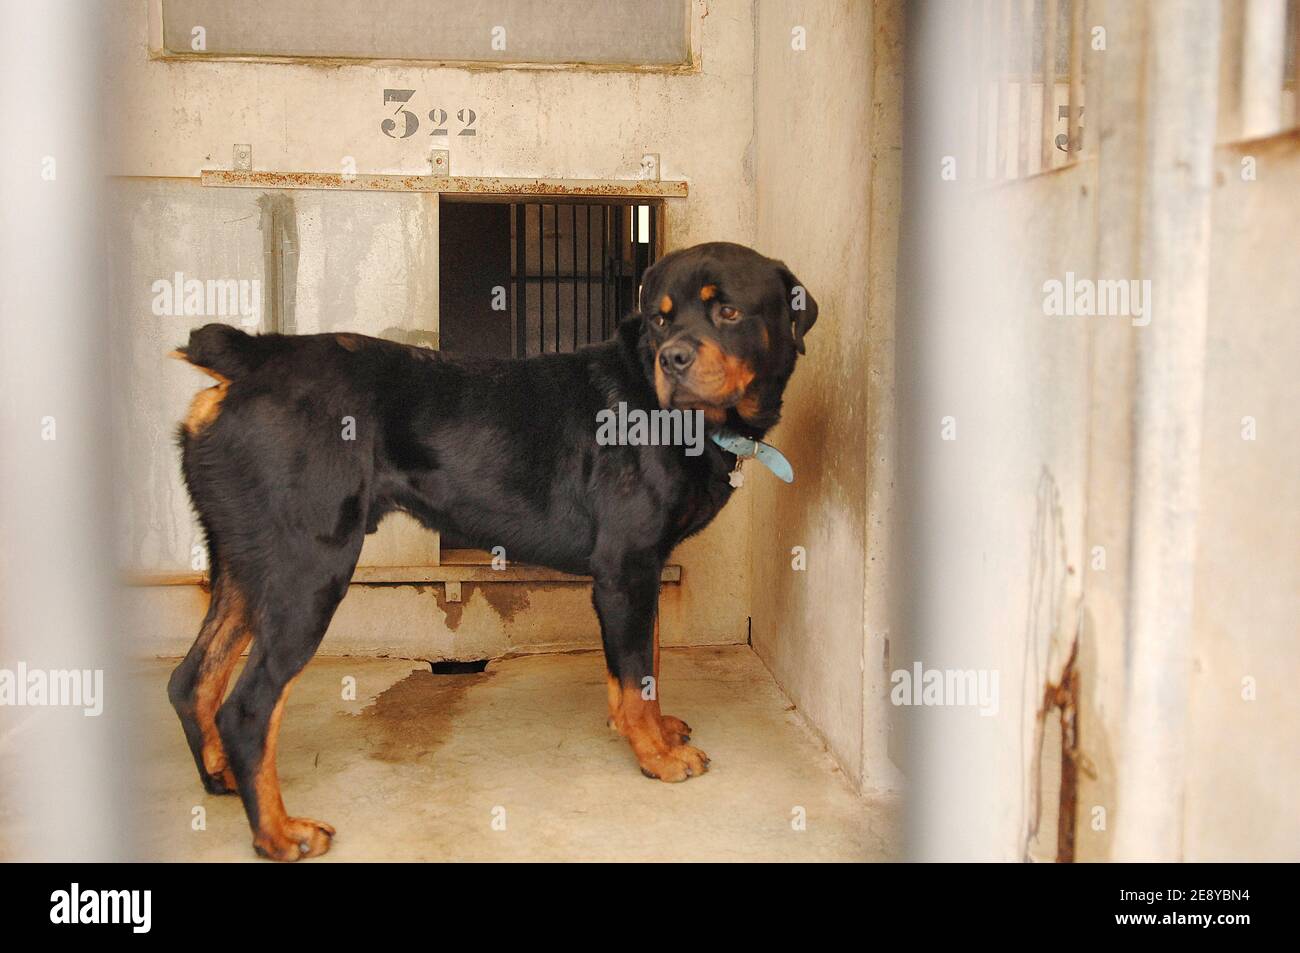 A Rottweiler at SPA refuge in Gennevilliers near Paris, France on September  27, 2007. Photo by Giancarlo Gorassini/ABACAPRESS.COM Stock Photo - Alamy